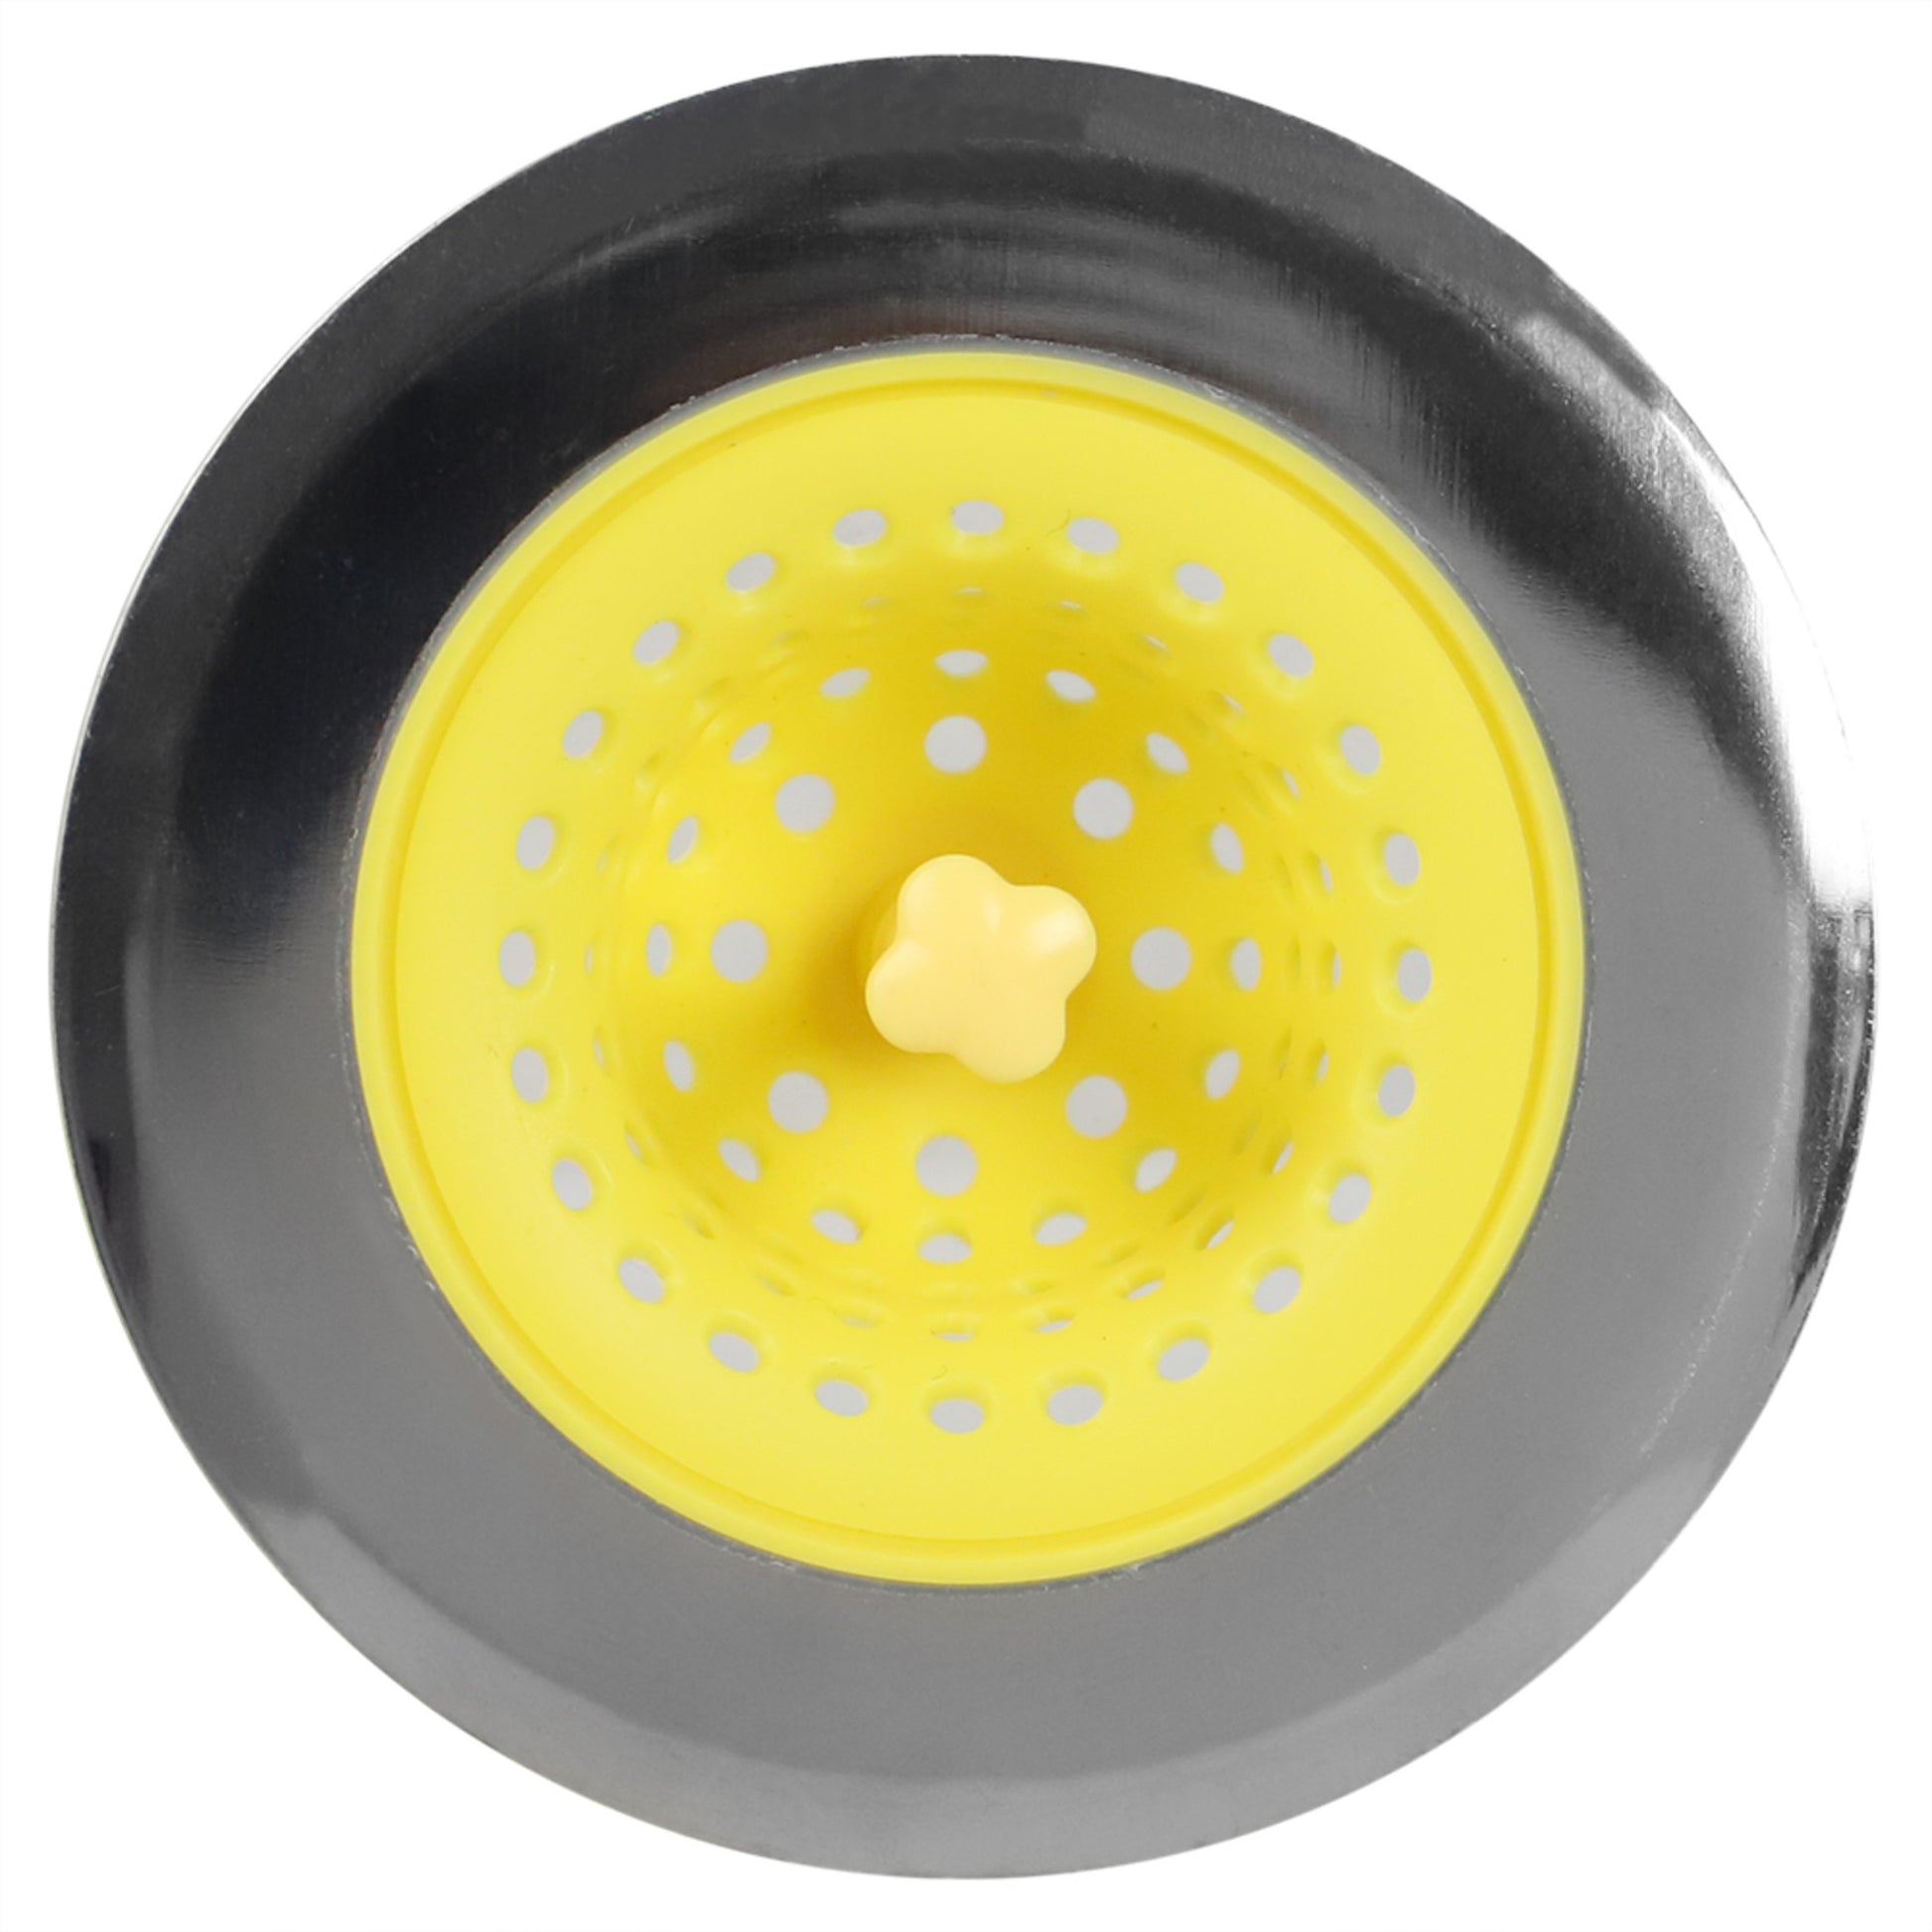 Home Basics Brights Silicone Sink Strainer with Stainless Steel Rim, Yellow - Yellow